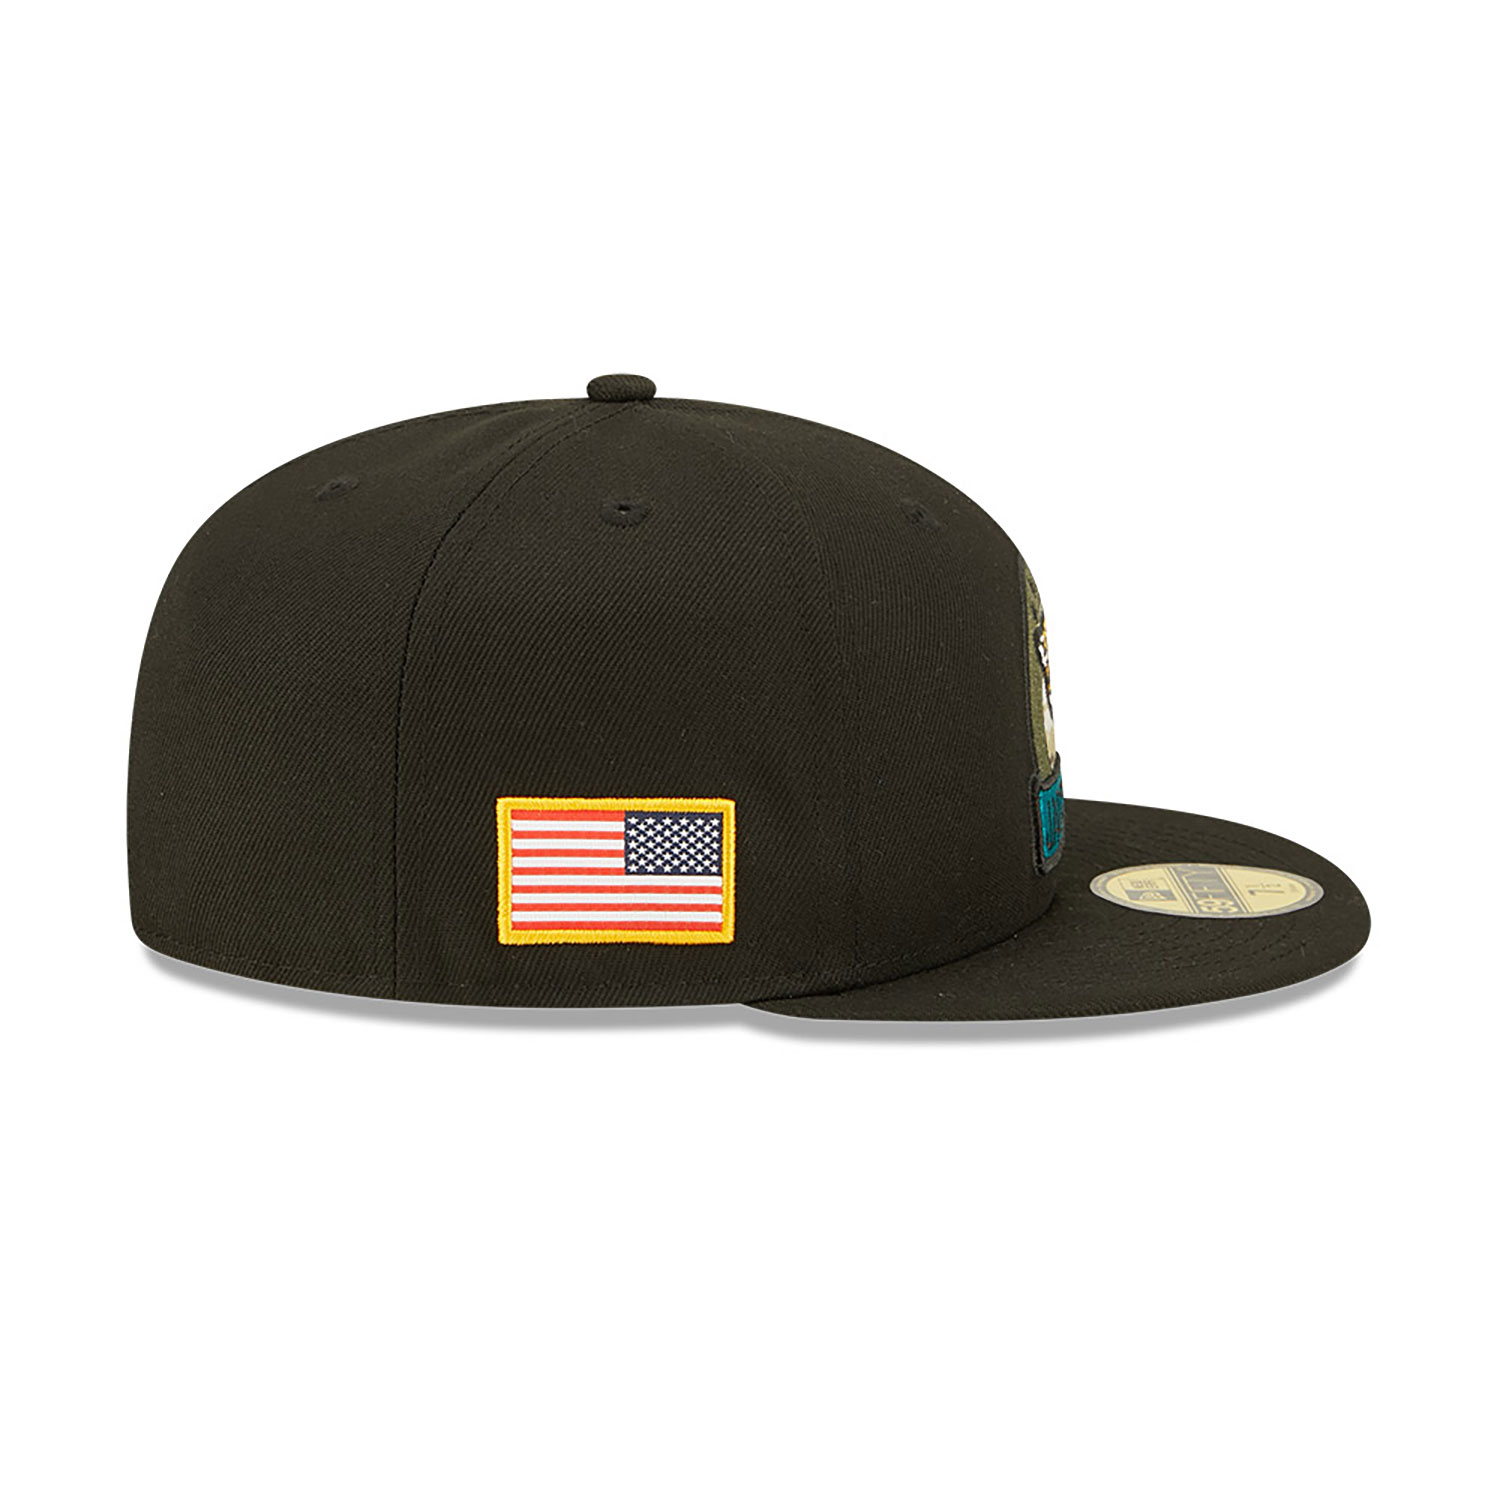 Jacksonville Jaguars NFL Salute to Service Black 59FIFTY Fitted Cap